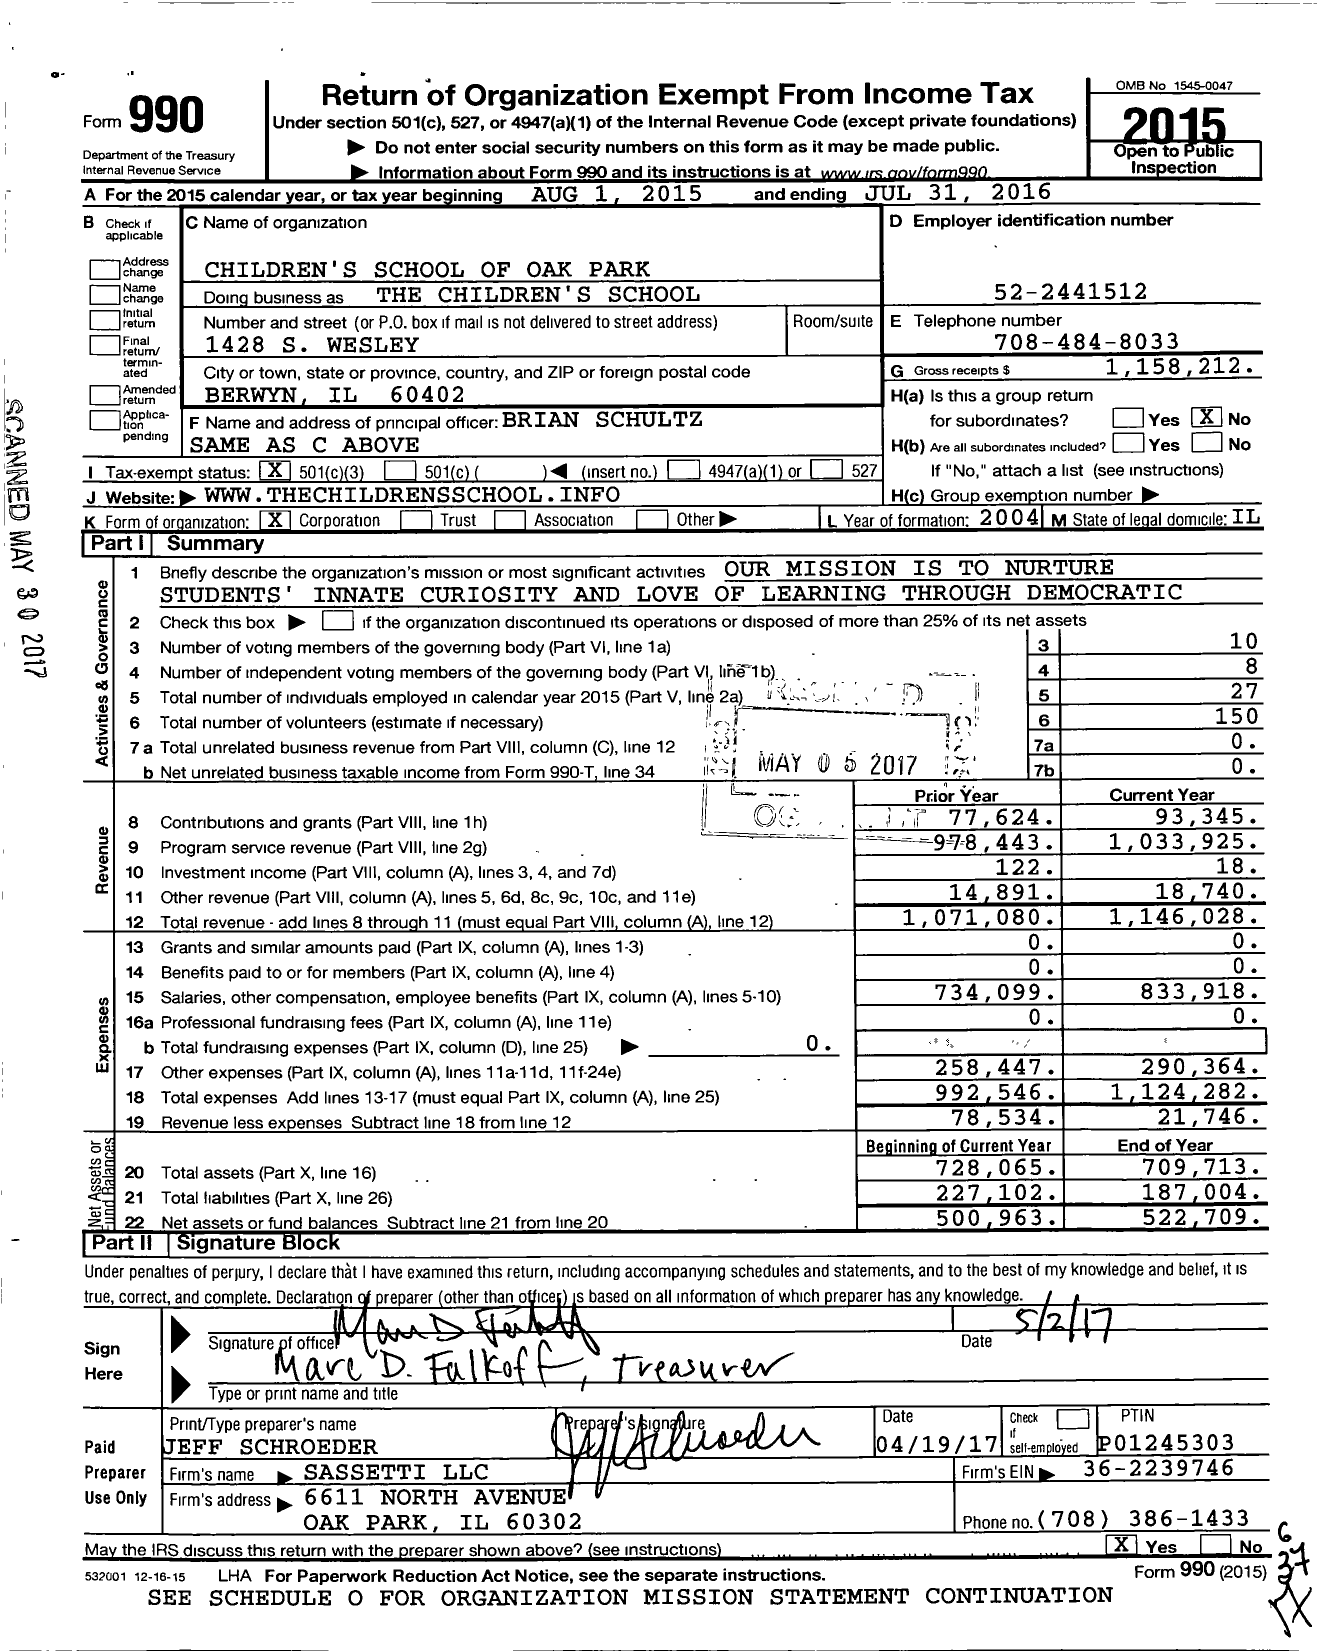 Image of first page of 2015 Form 990 for The Children's School